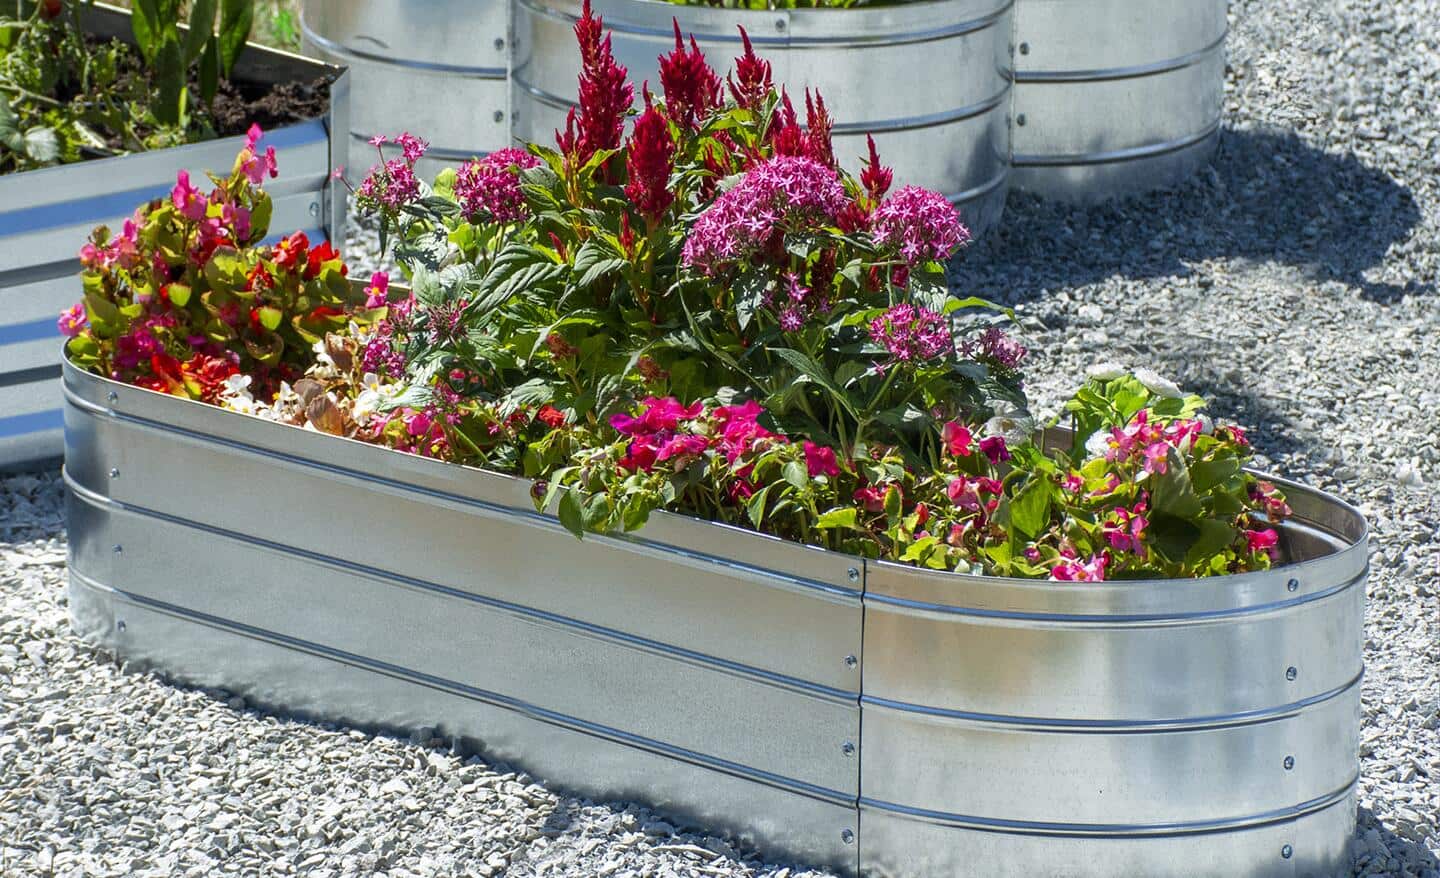 Galvanized steel raised garden bed holding colorful flowers.